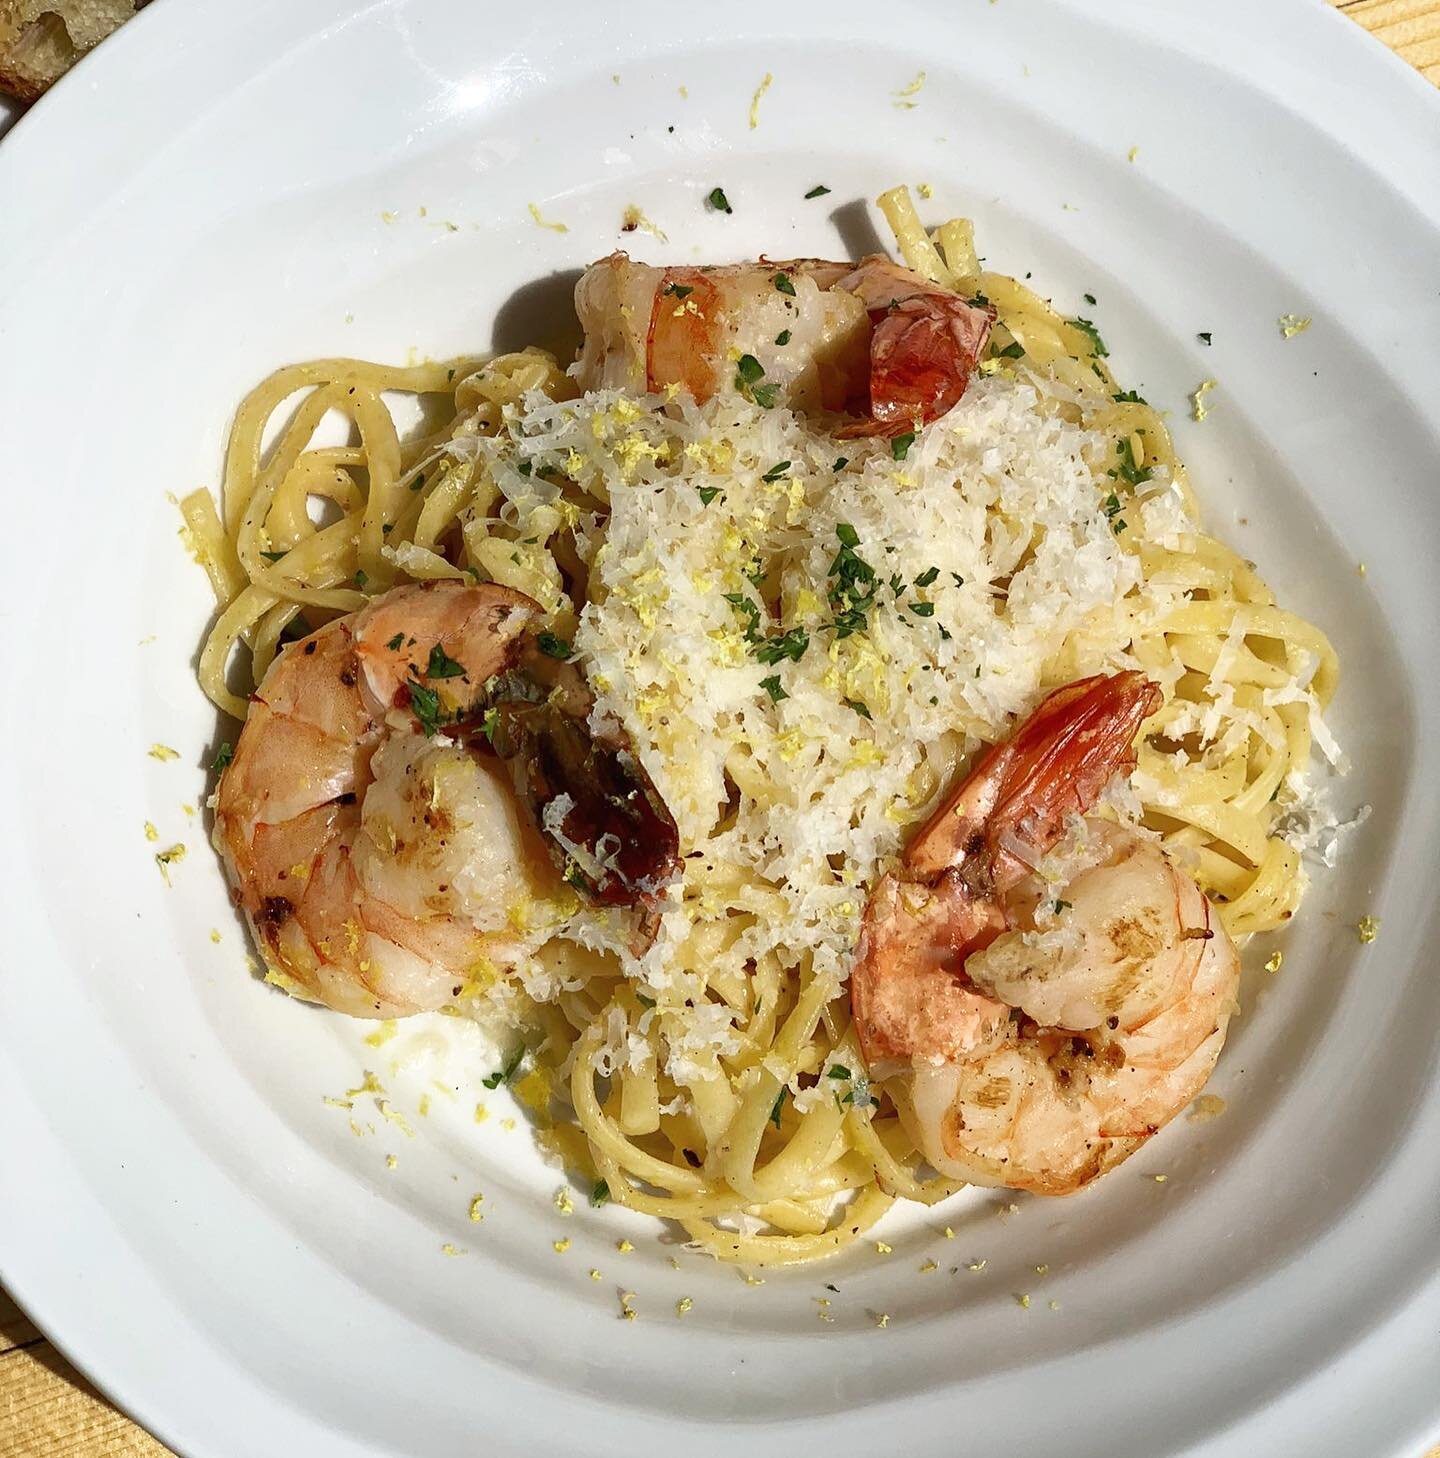 HAPPY NATIONAL SHRIMP SCAMPI DAY! 🍤 We&rsquo;re doing a special shrimp scampi pasta all weekend to celebrate! 🍤✨🍝 

Hours of operation: 
Tuesday 4-9pm
Wednesday-Saturday 12-9pm
Sunday 12-8pm

🎉 Join us for Happy Hour 🎉
Wednesday &amp; Thursday 4